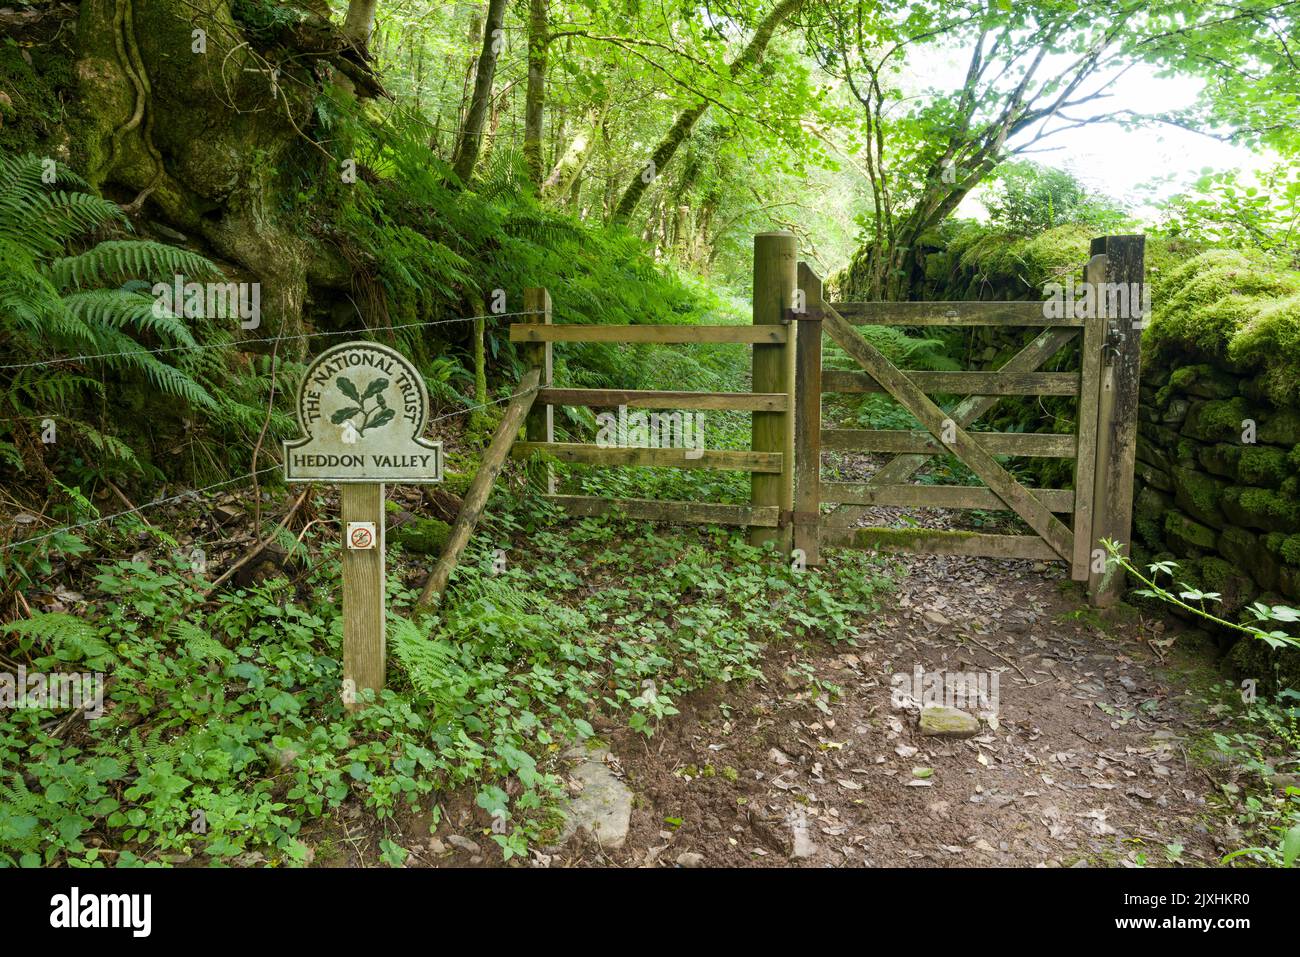 A National Trust signpost for the Heddon Valley next to a gate into Heale Wood in the Exmoor National Park, North Devon, England. Stock Photo